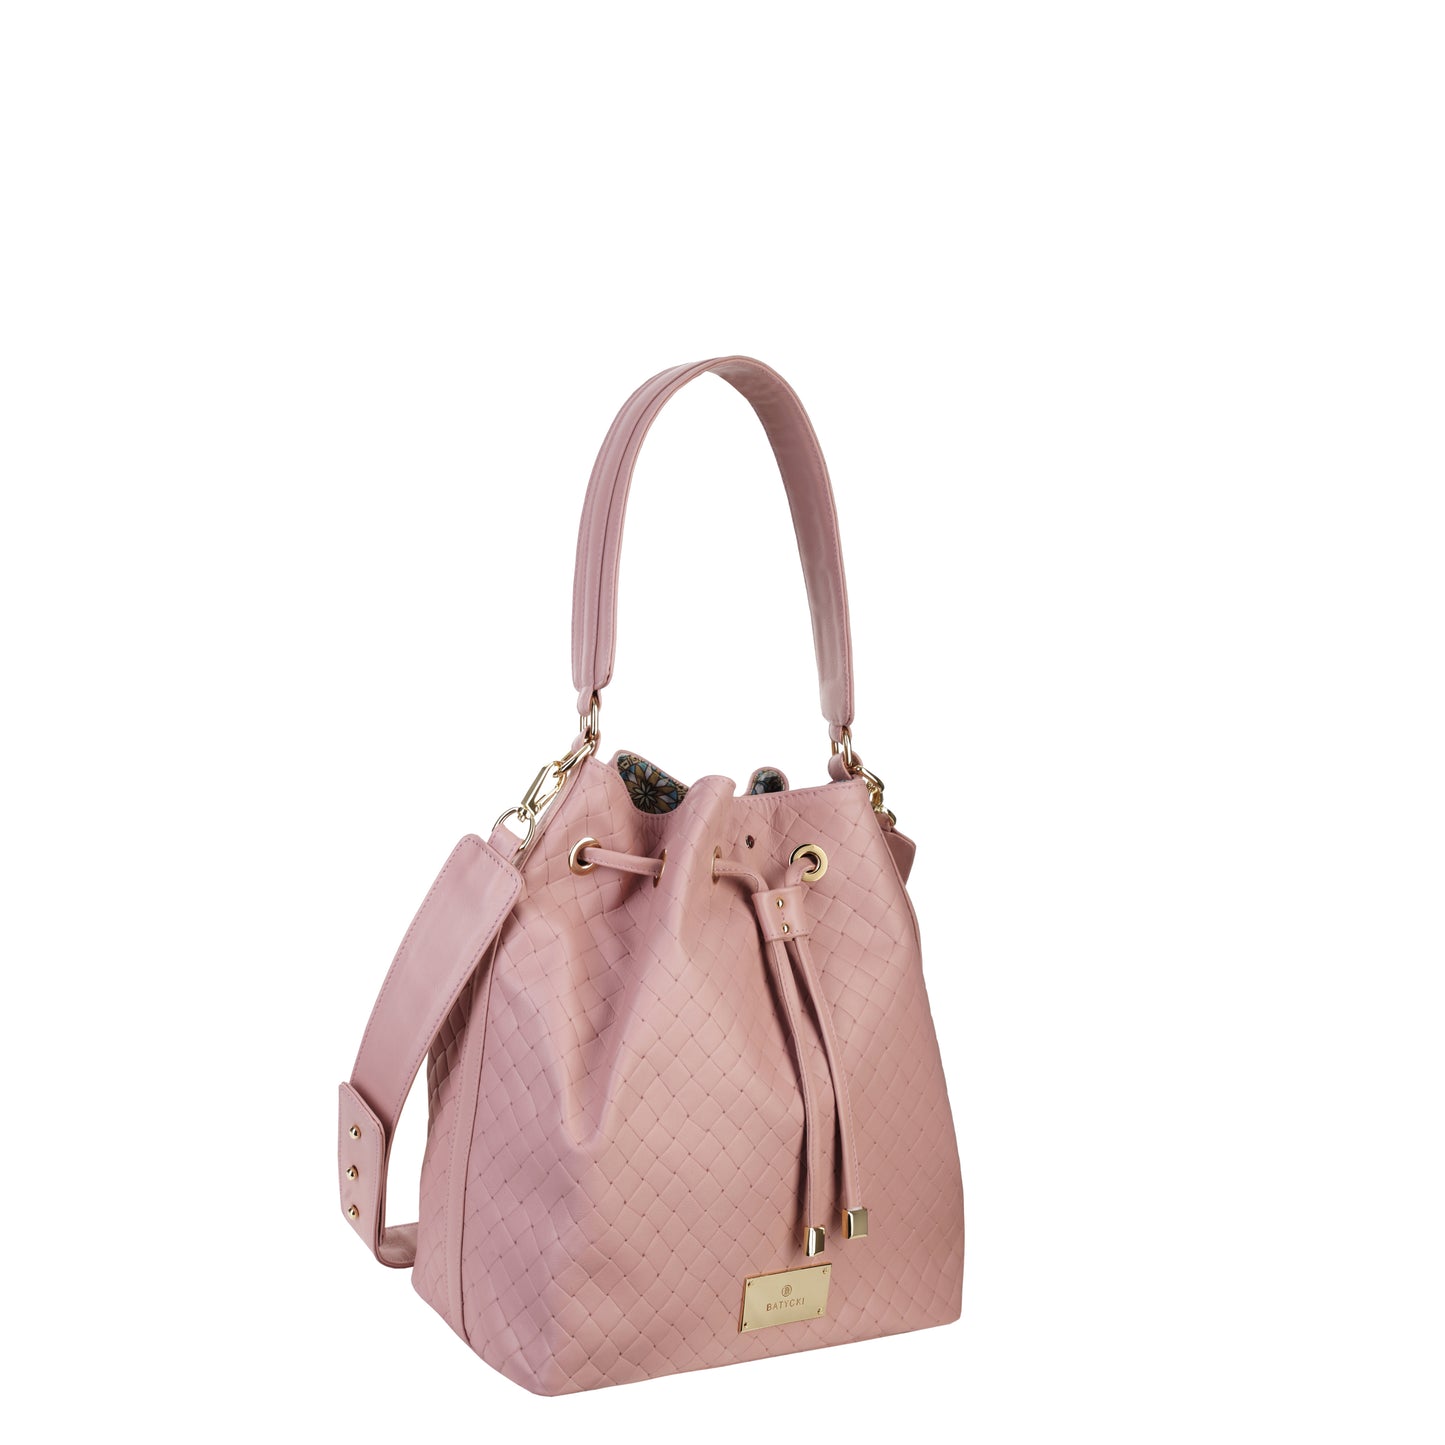 Women's leather bag SO SOFTLY! powder pink